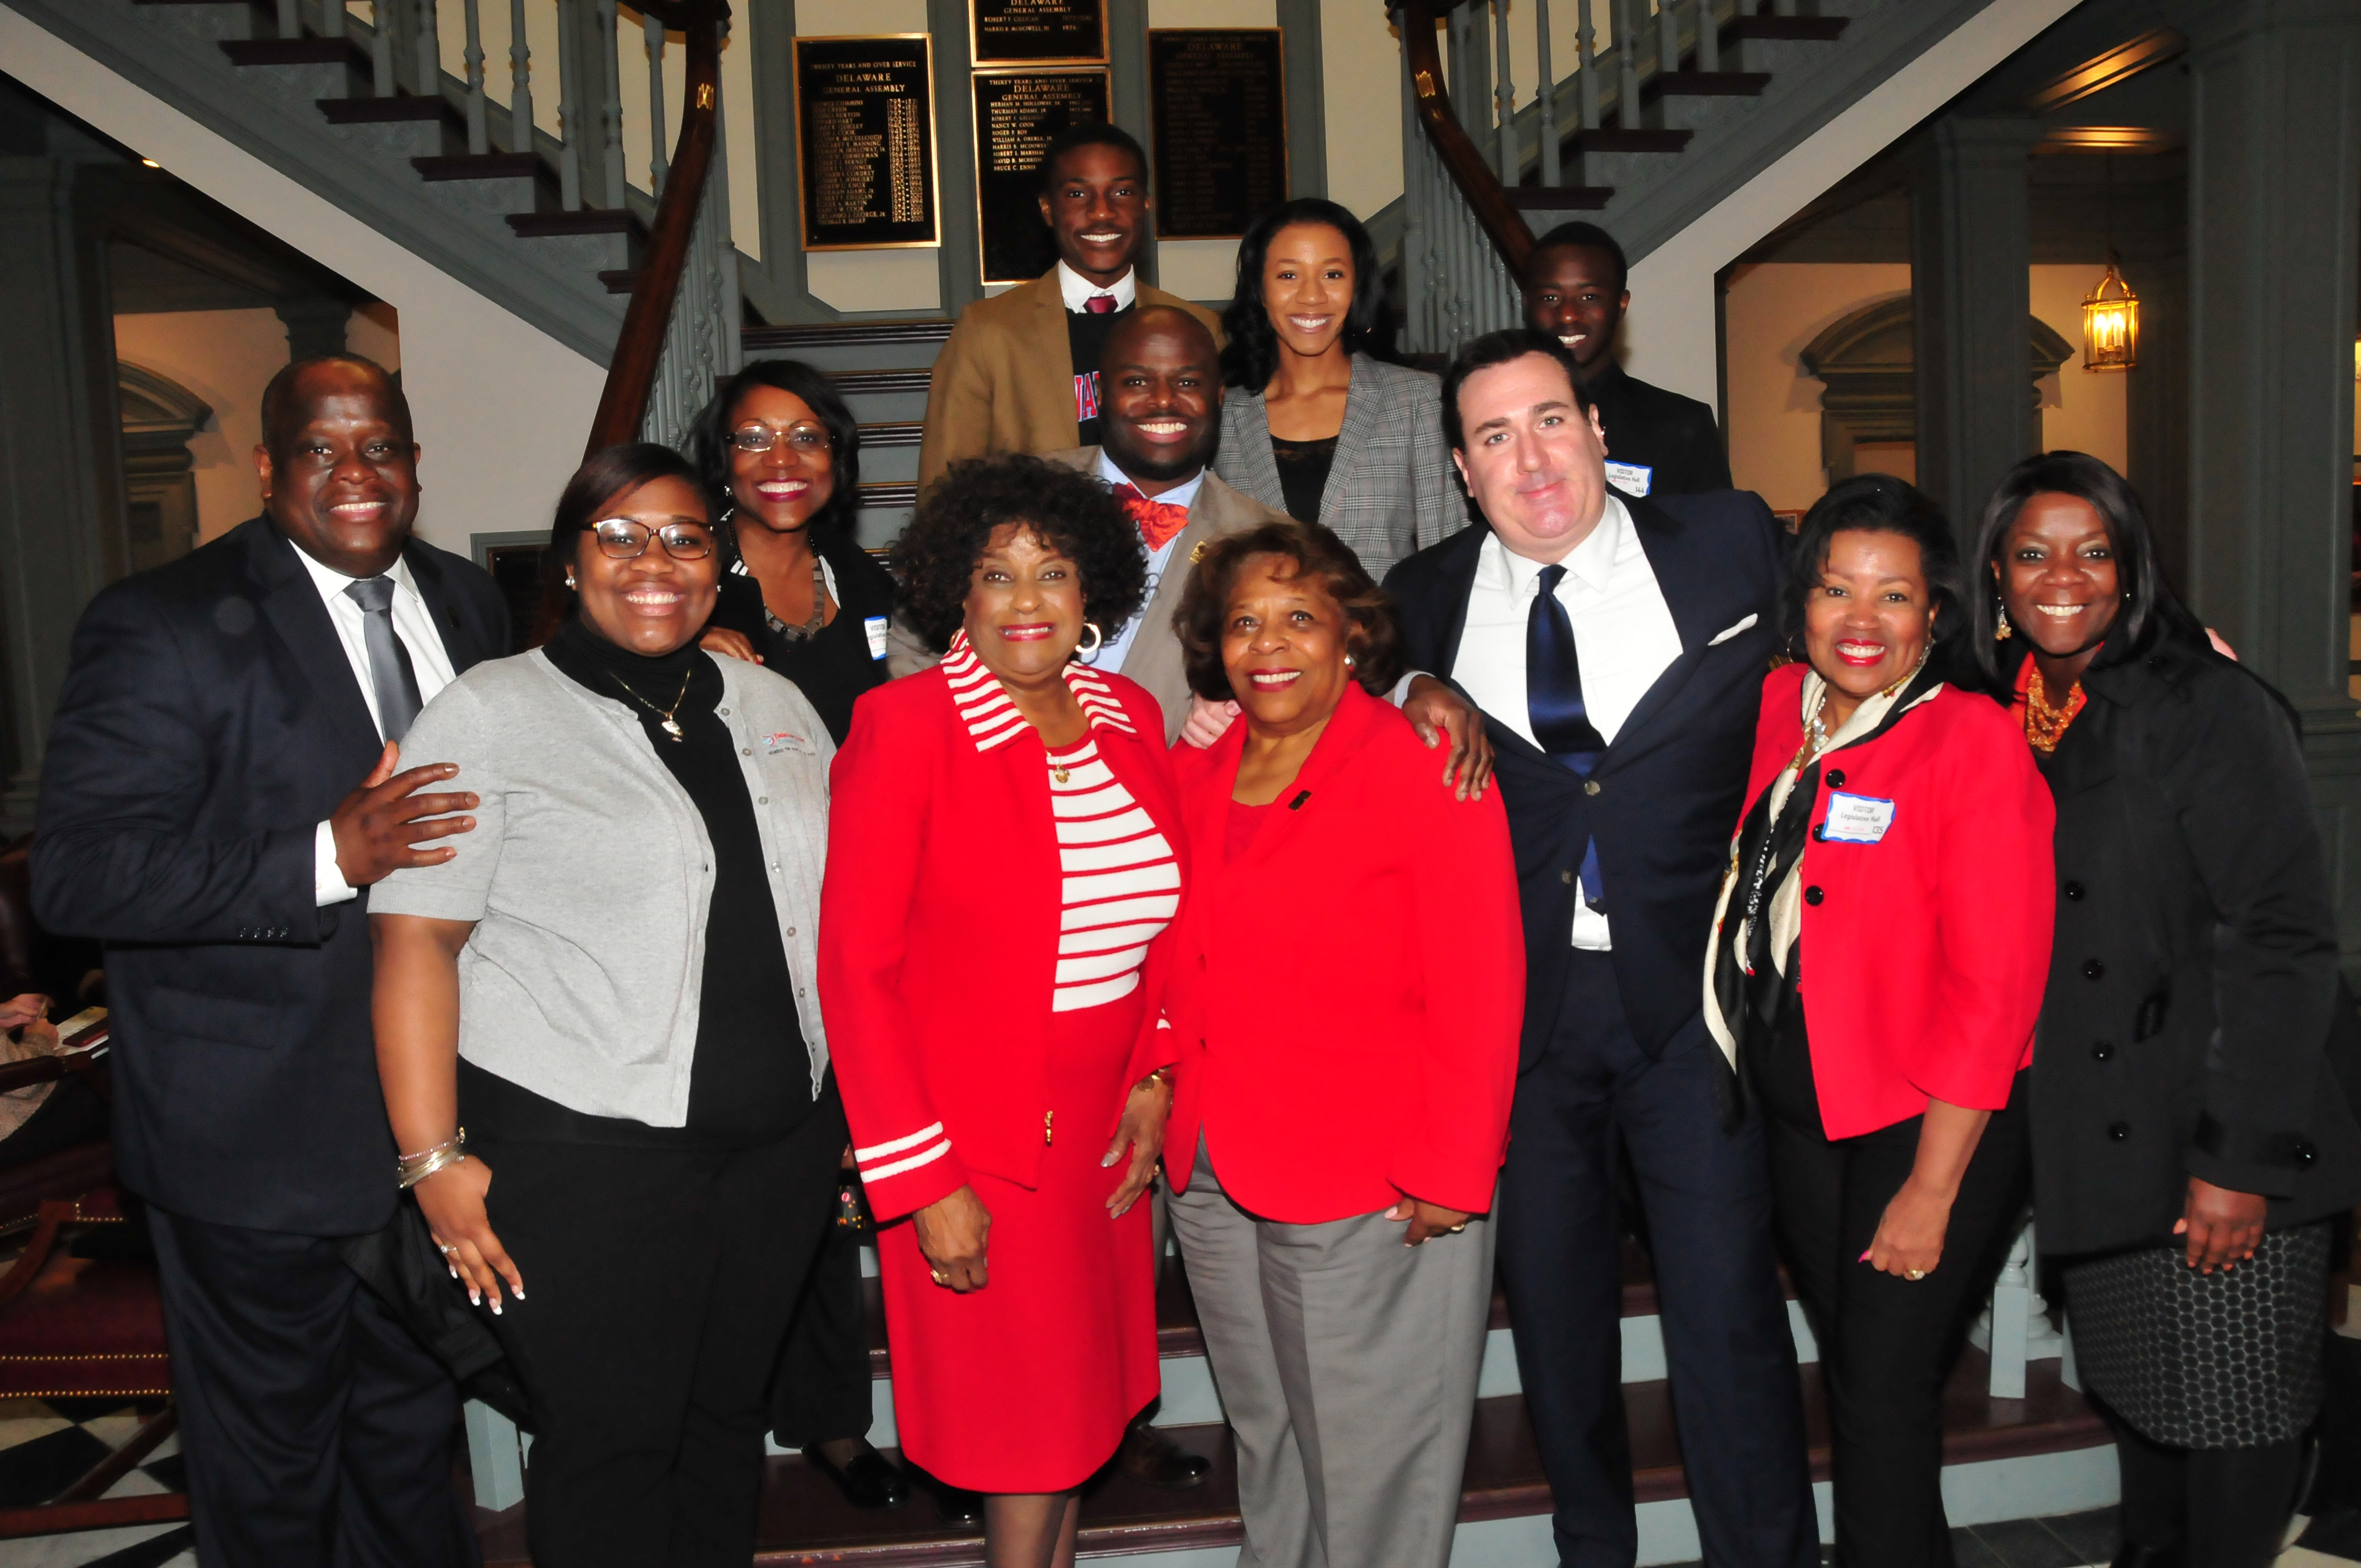 A DSU delegation -- headed by DSU Acting President Wilma Mishoe and including state Reps. Stephanie Bolden and Sean Lynn -- is all smiles after the state House of Representatives unanimously passed Senate Bill 90 that adds a fourth year of state funding to the Inspire Scholarship Program.